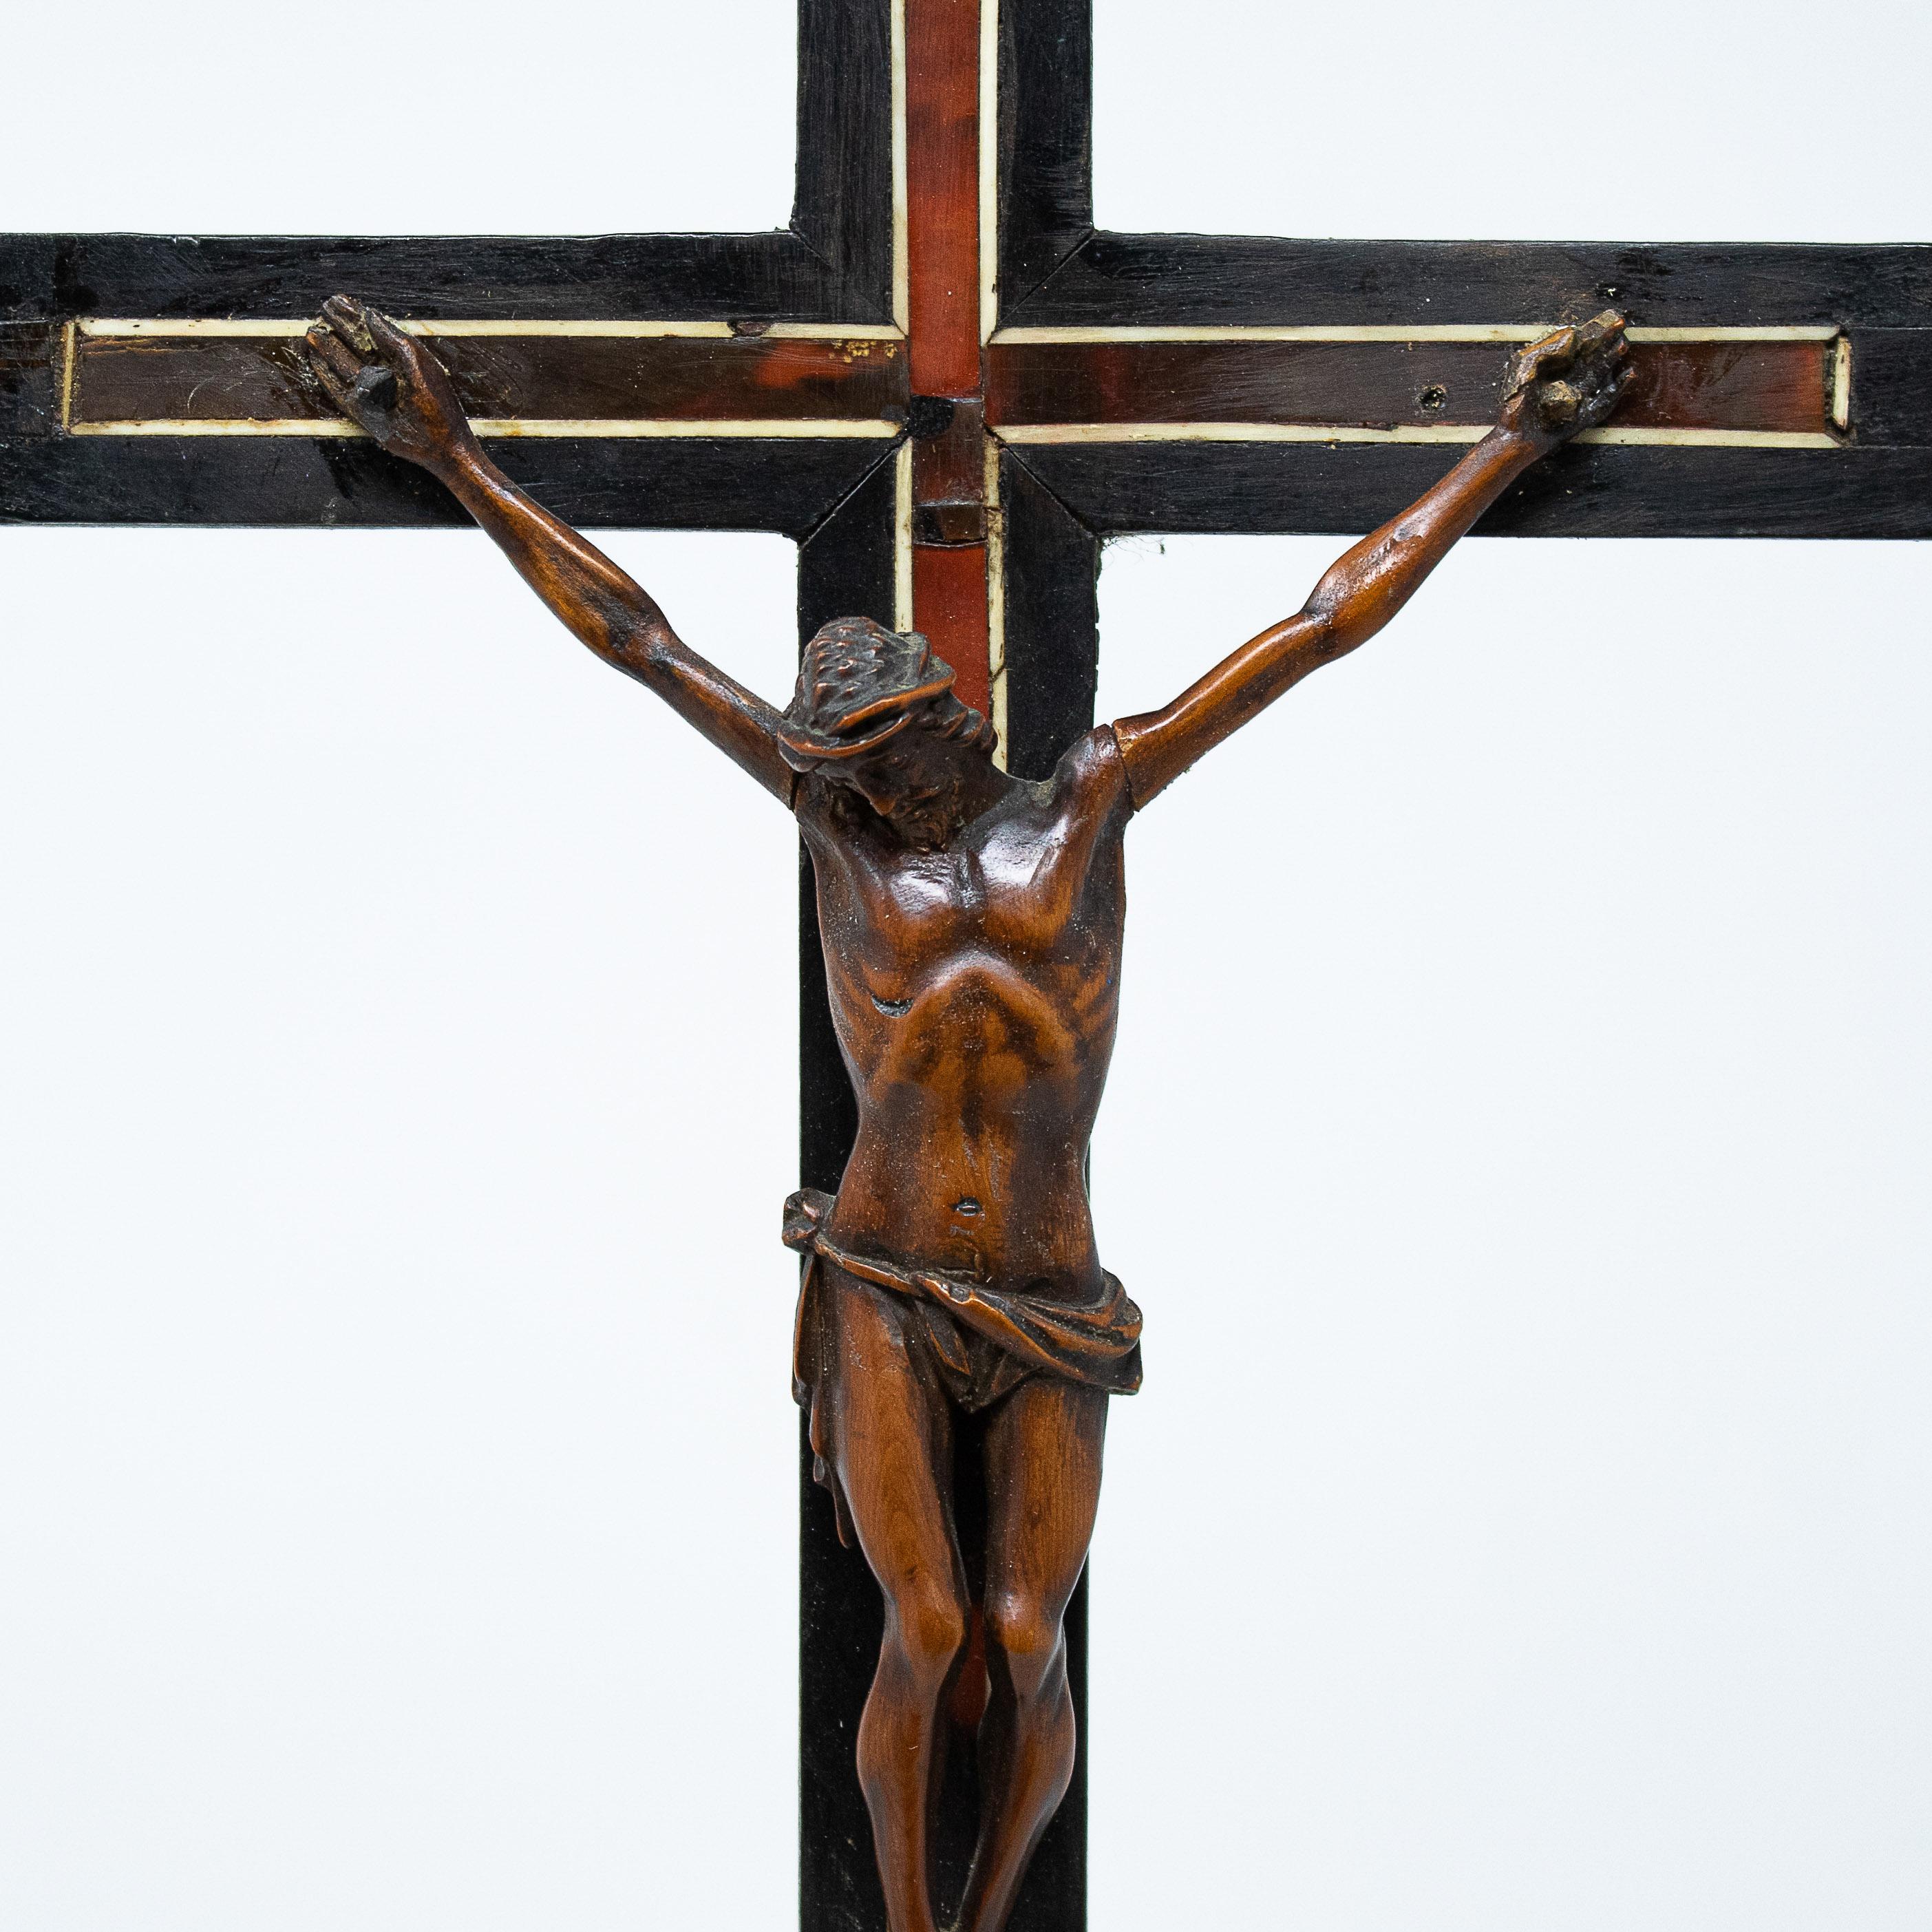 17th century
Crucifix
Measures: Boxwood, 42 cm high x 8 x 14

The sculpture depicting the crucified Christ examined here represents a refined example of seventeenth-century cabinetry in boxwood. The figure of Christ, now dead on the cross, is